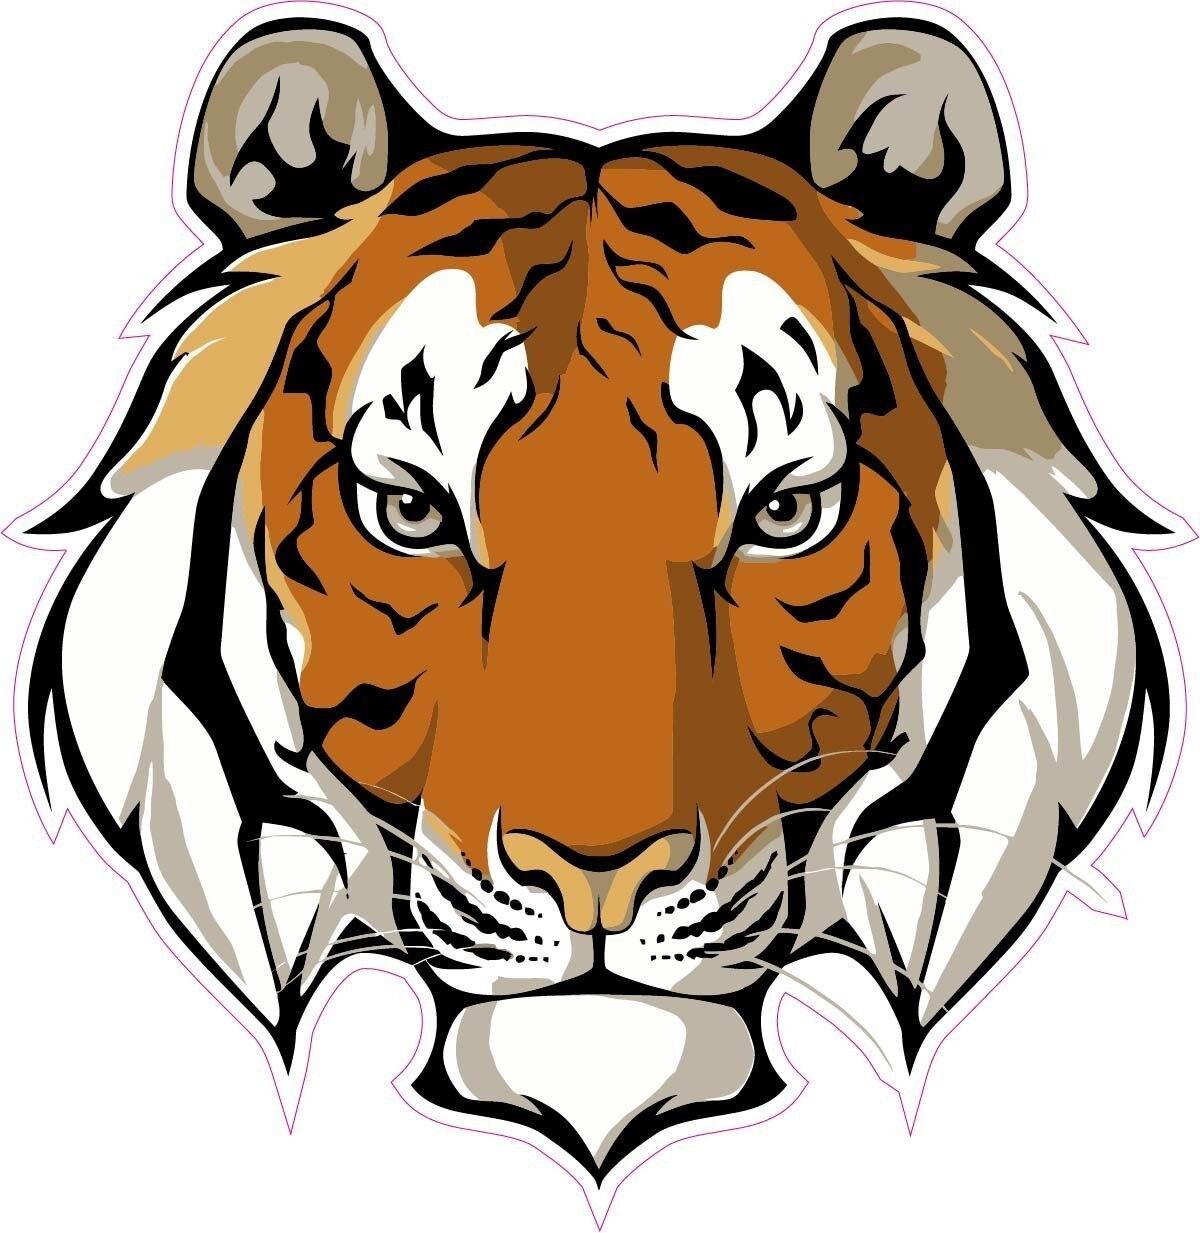 Tiger Head Decal is 5